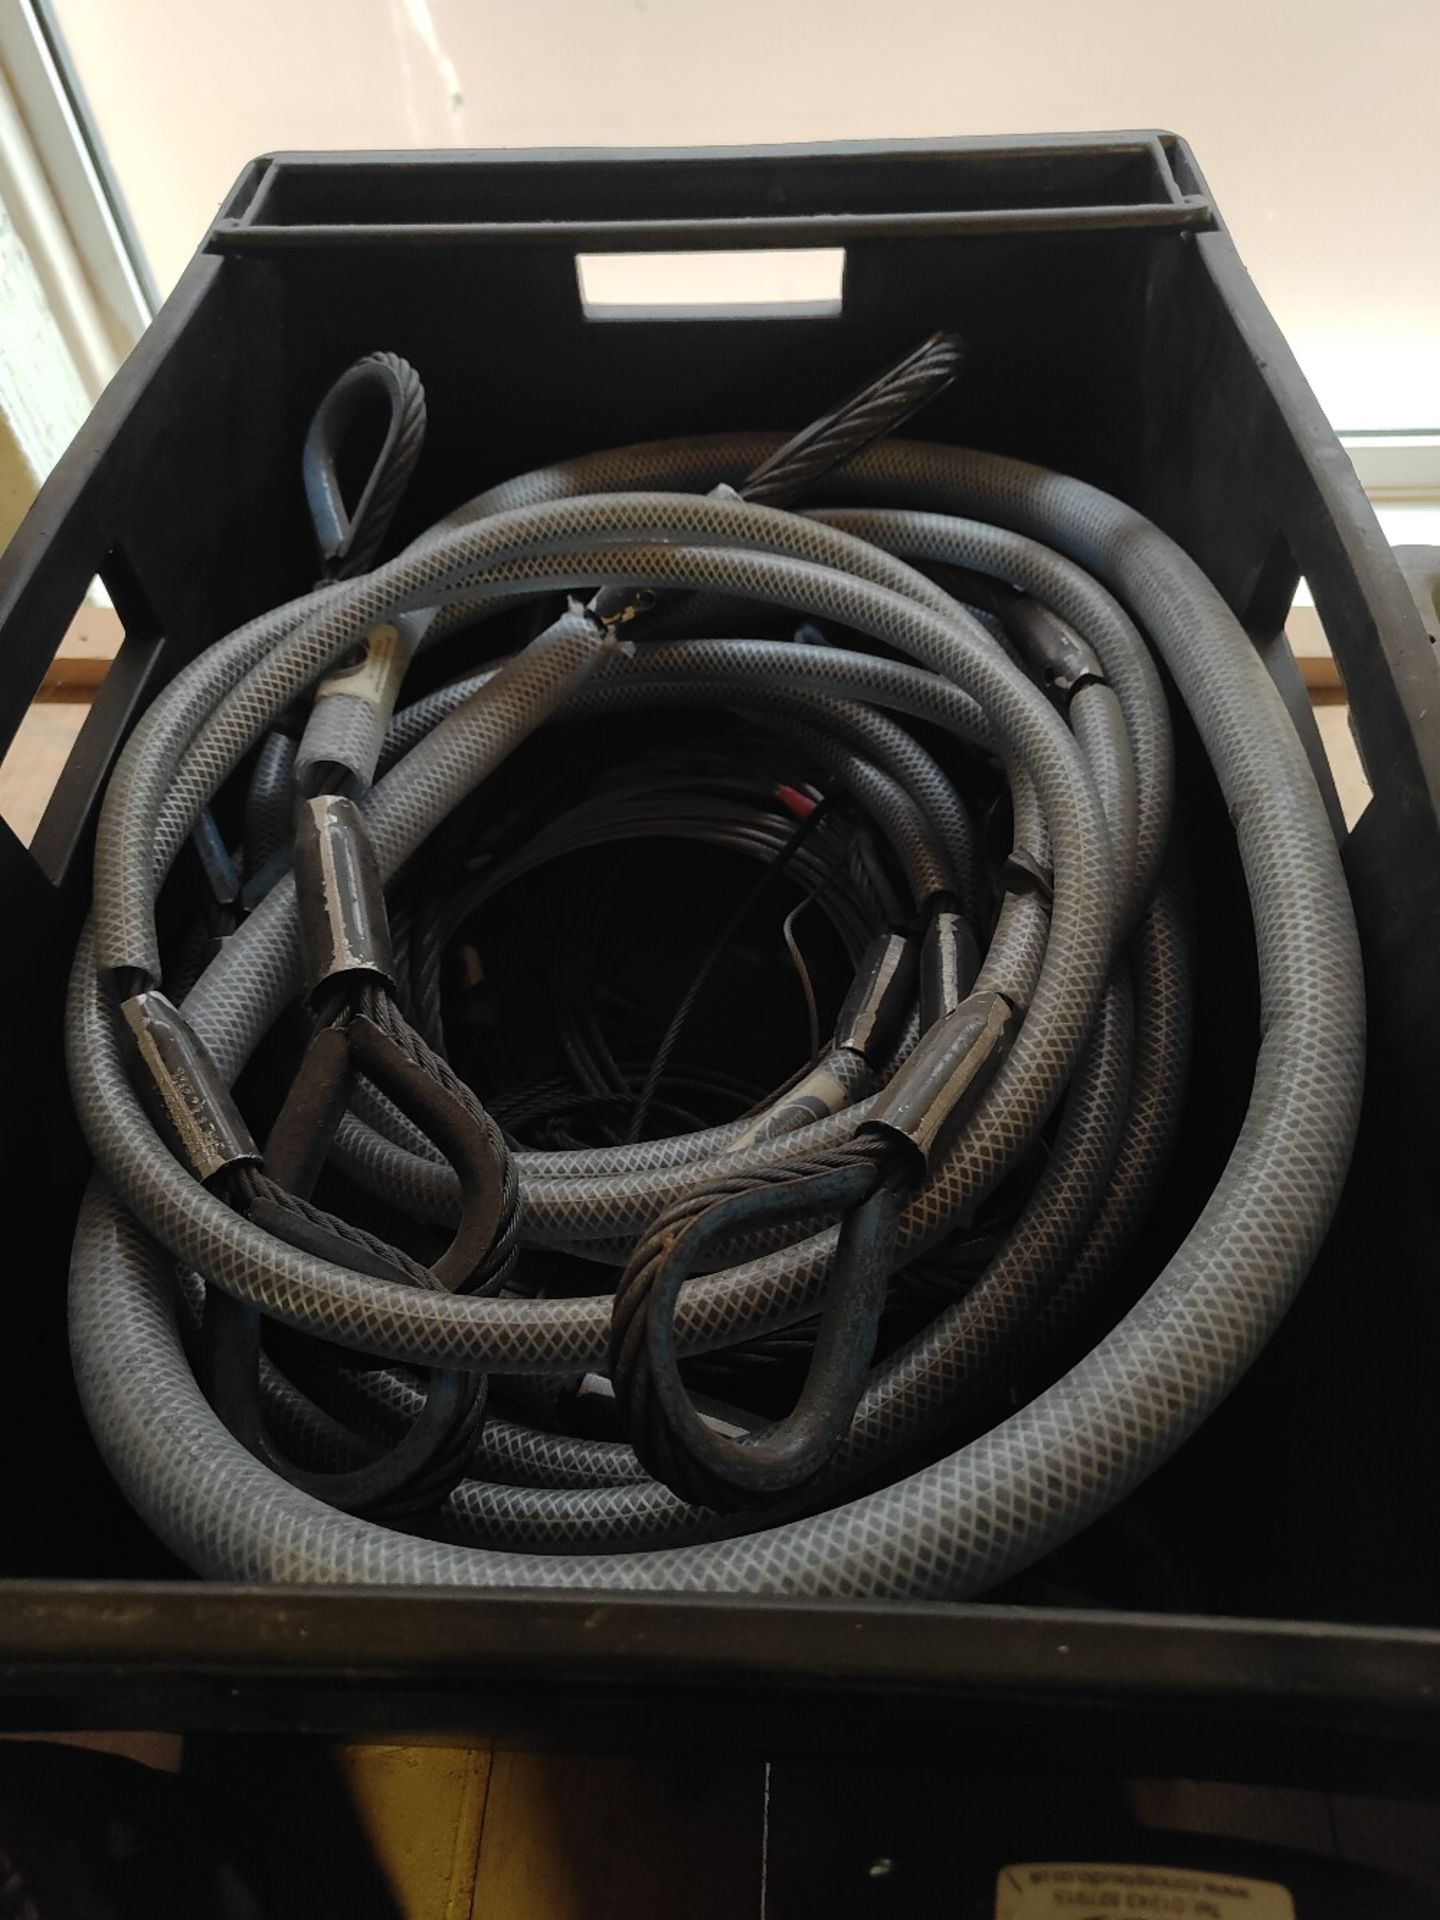 Lifting Equipment - To Include: (2) Ace 0.5 Ton Chain Blocks, Lifting Straps & Cables, Ropes - Image 5 of 6